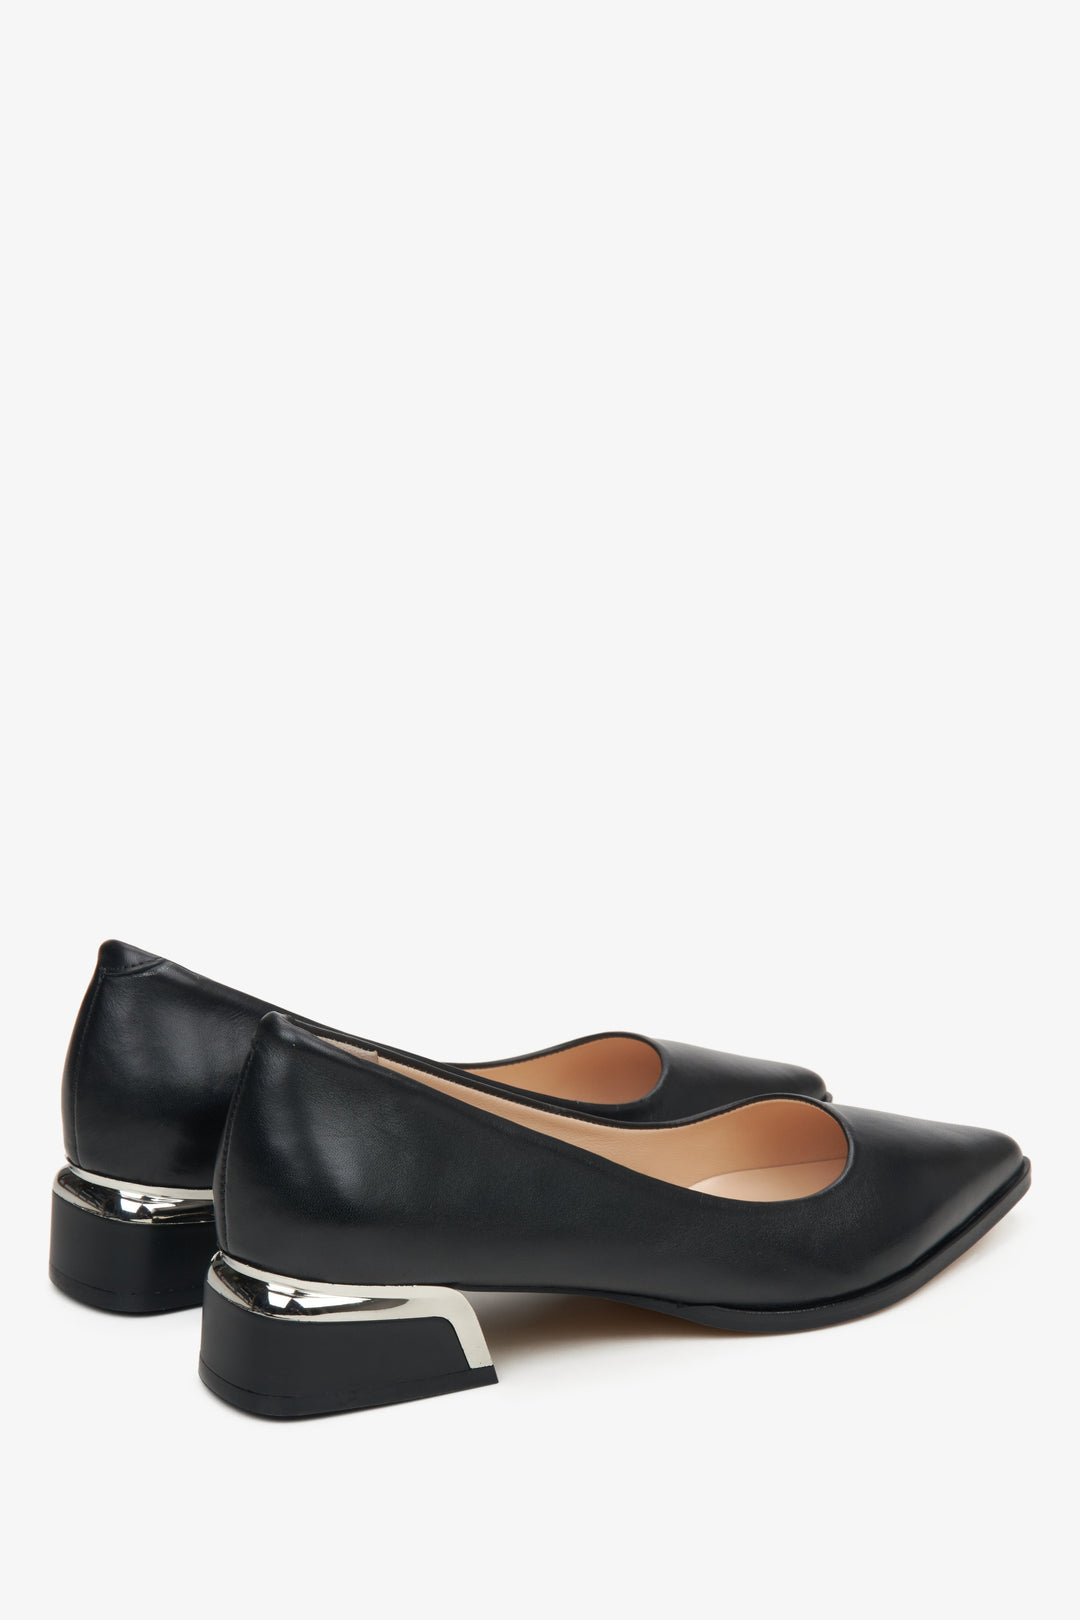 Women's black leather pumps by Estro - close-up on the side line and heel of the shoe.